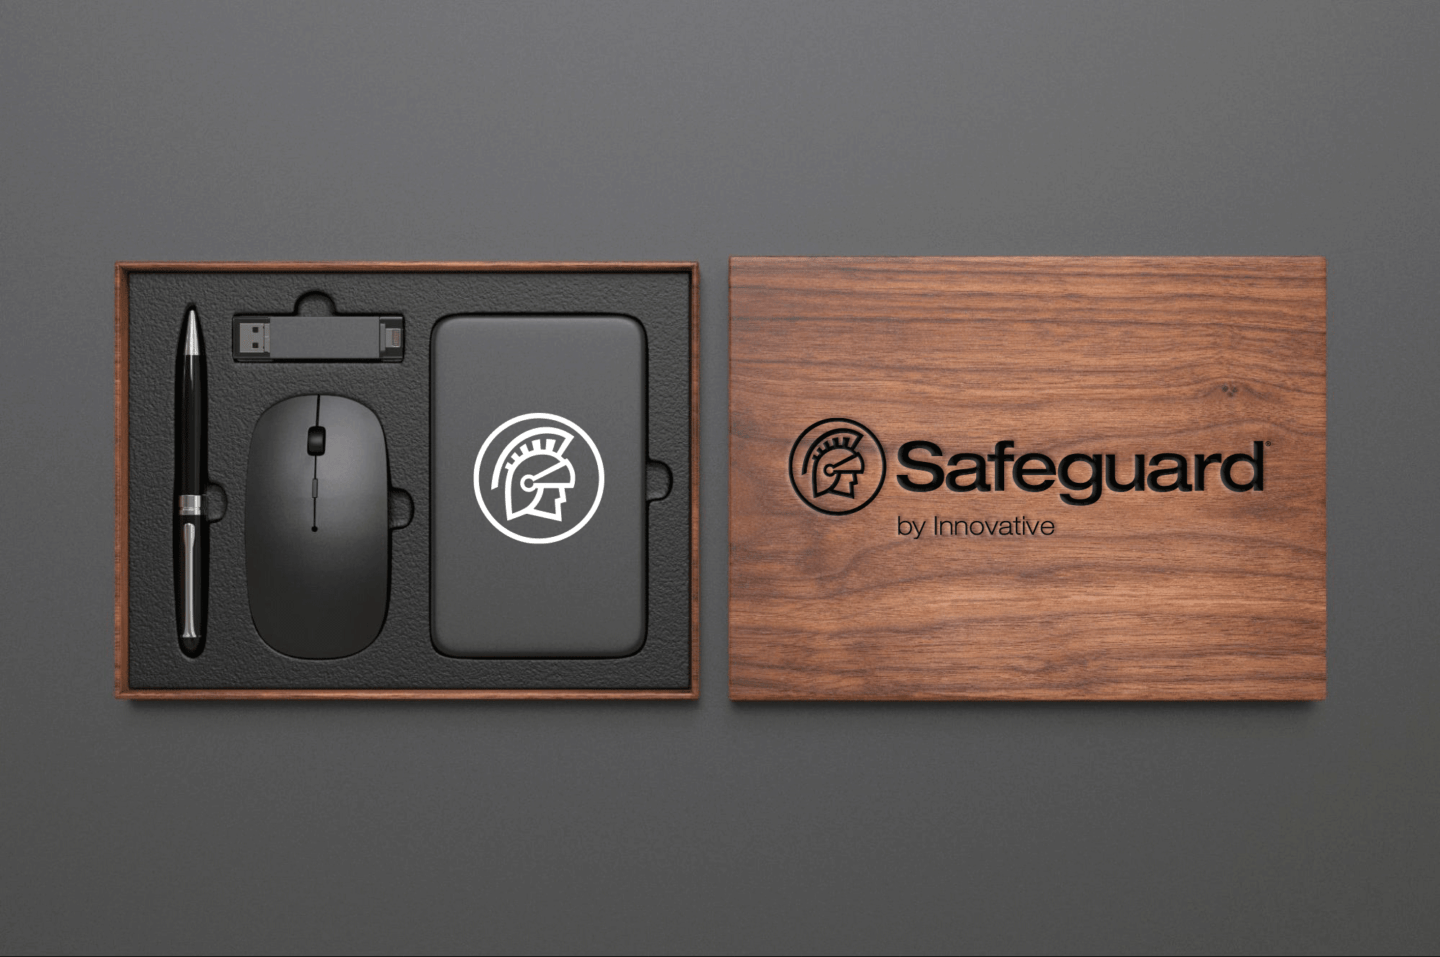 A wooden box with the Safeguard by Innovative logo on it holds a computer mouse, USB, pen, and power bank.